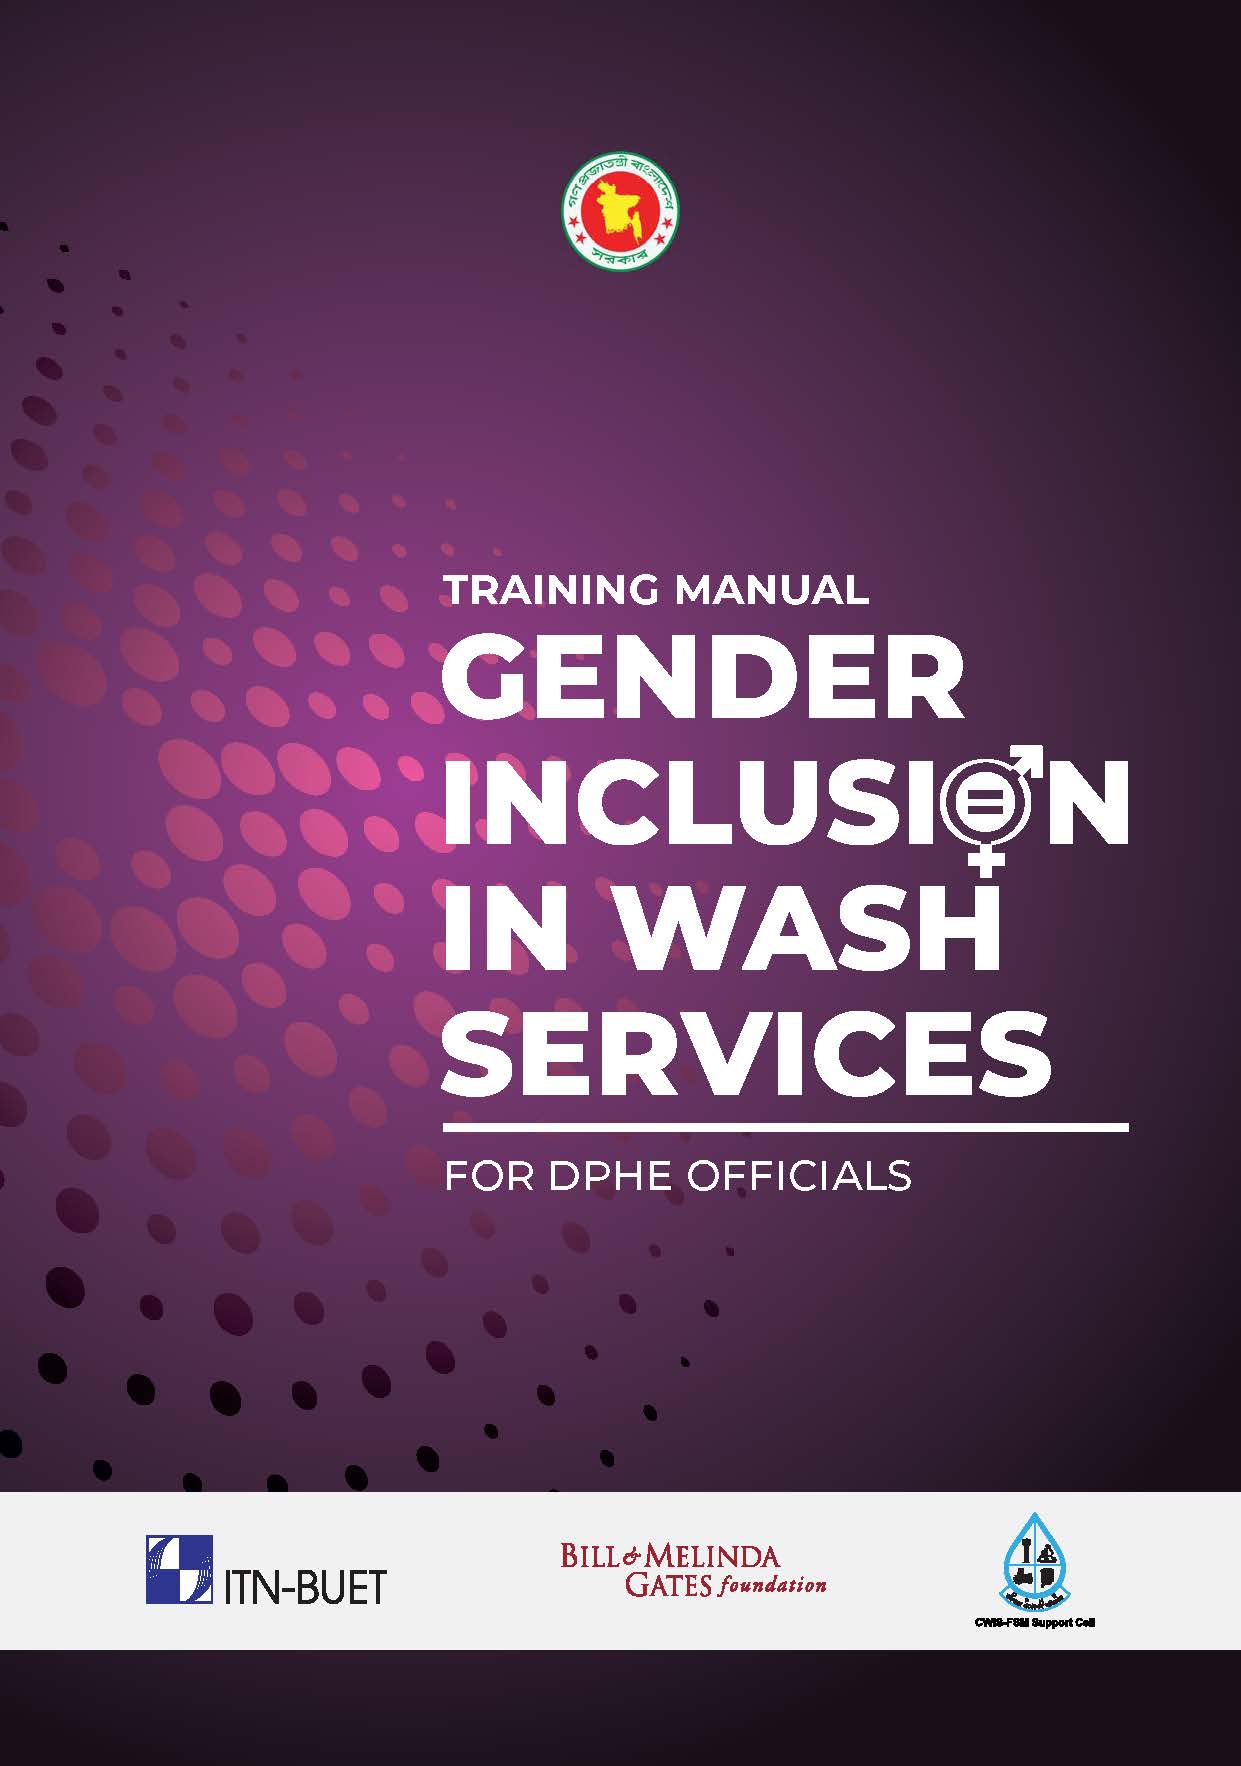 Training Manual on Gender Inclusion in WASH Services for DPHE Officials